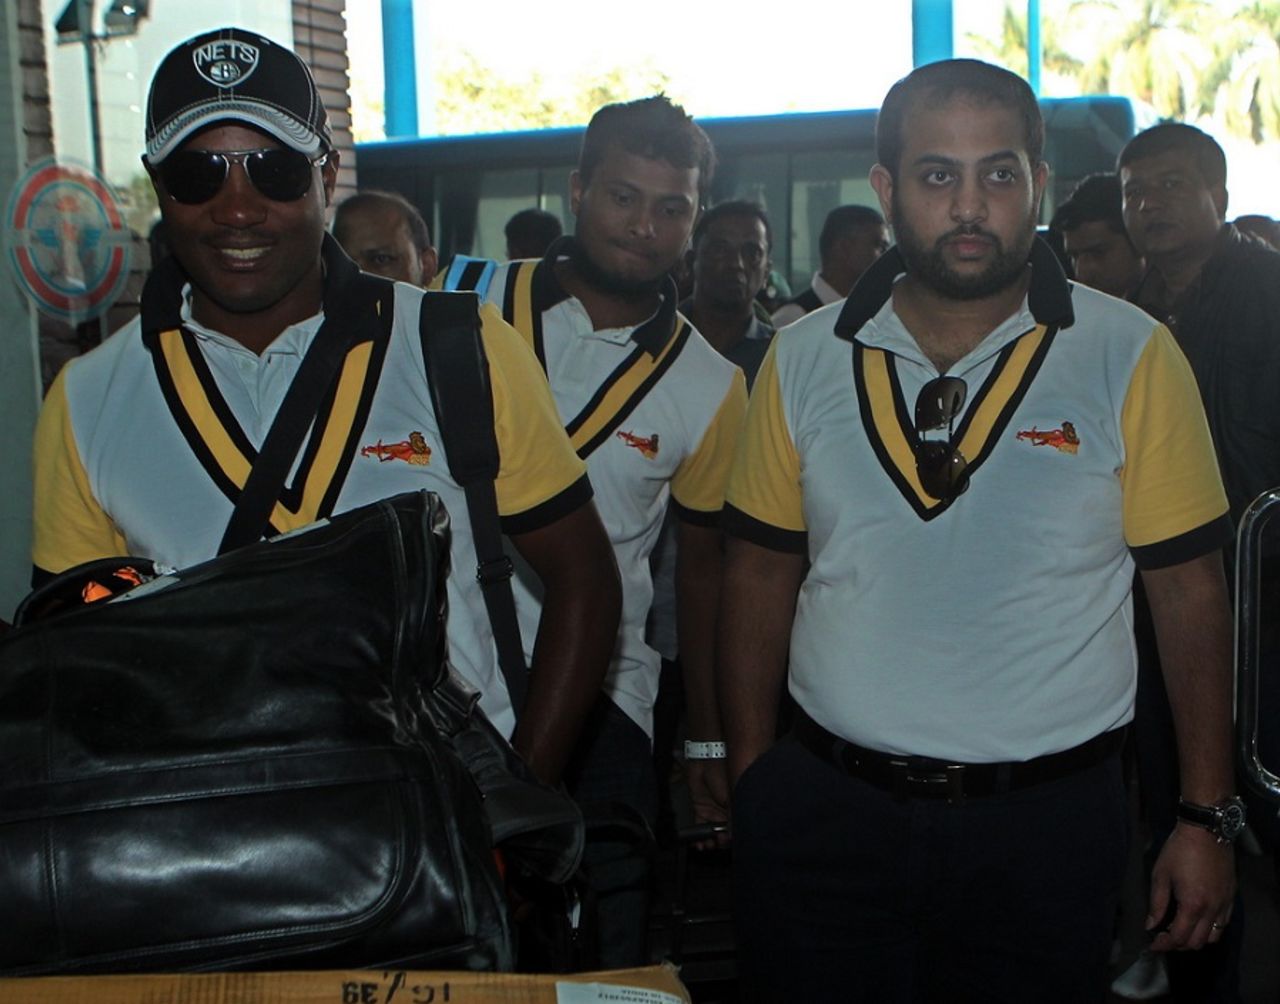 Brian Lara, Chittagong Kings' brand ambassador, walks out of the Jessore airport with the team, Khulna, January 20, 2013